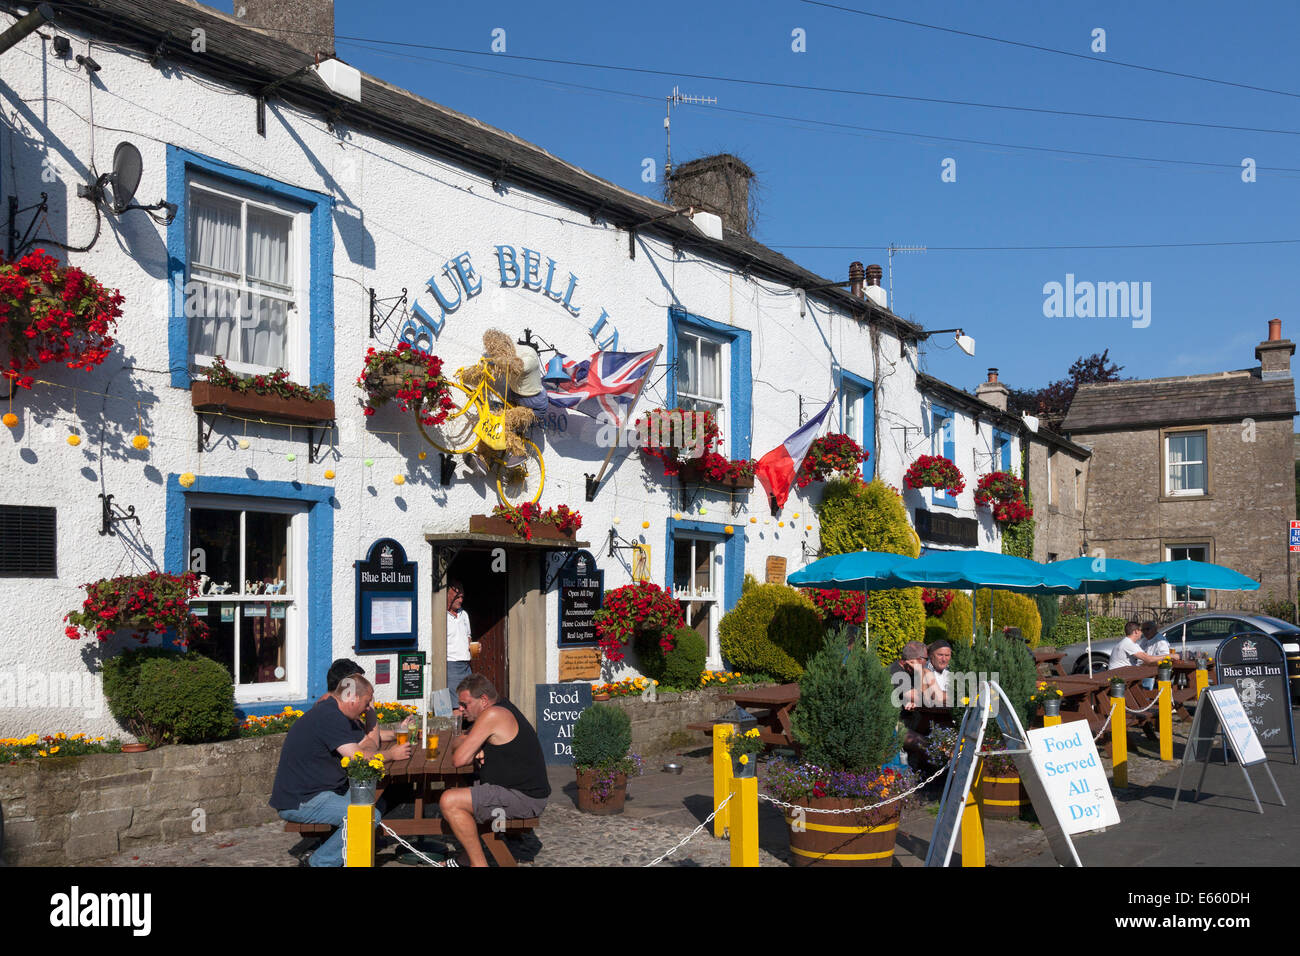 The Blue Bell Inn, Kettlewell, West Yorkshire Banque D'Images